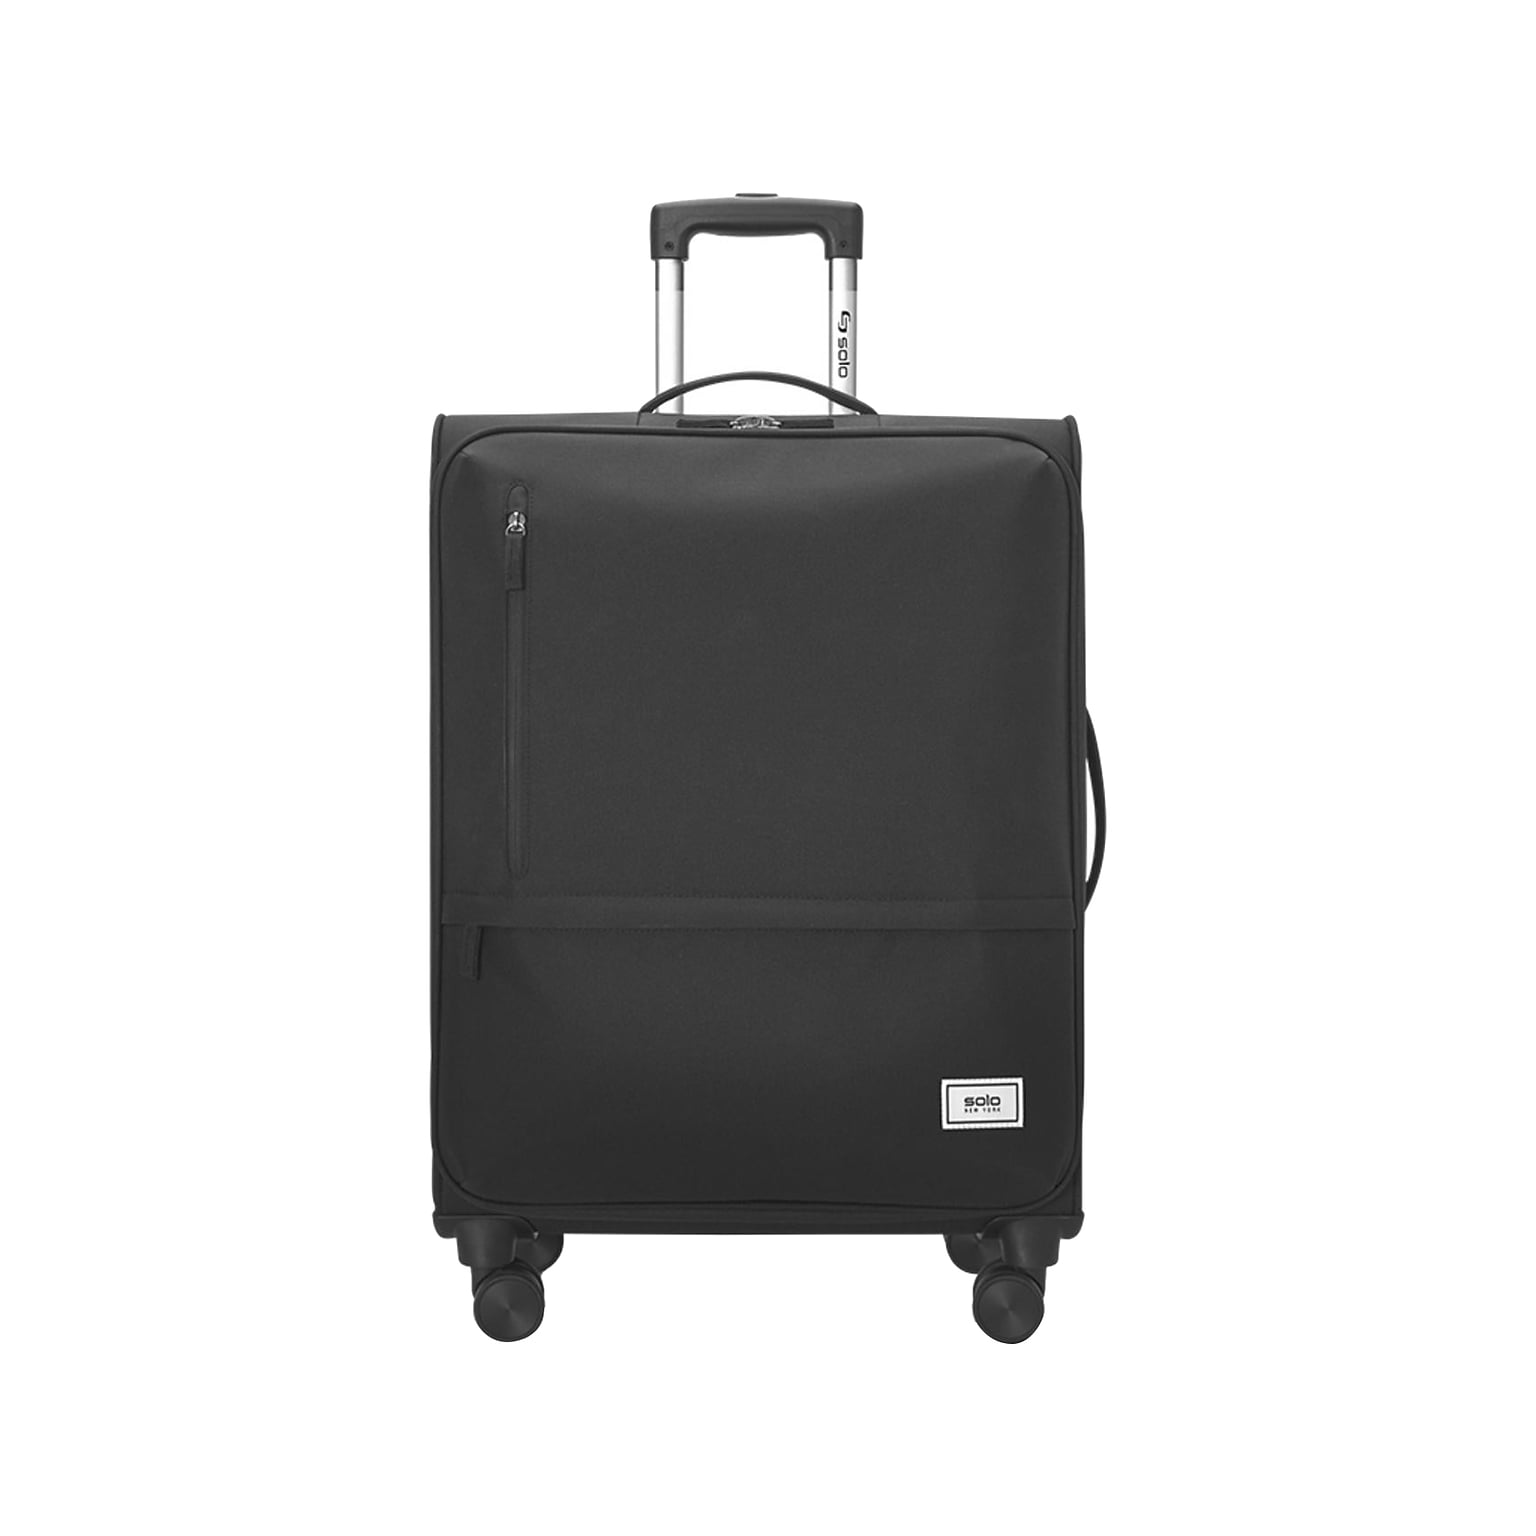 Solo New York Re:treat 26 Carry-On Suitcase, 4-Wheeled Spinner, Black (UBN931-4)